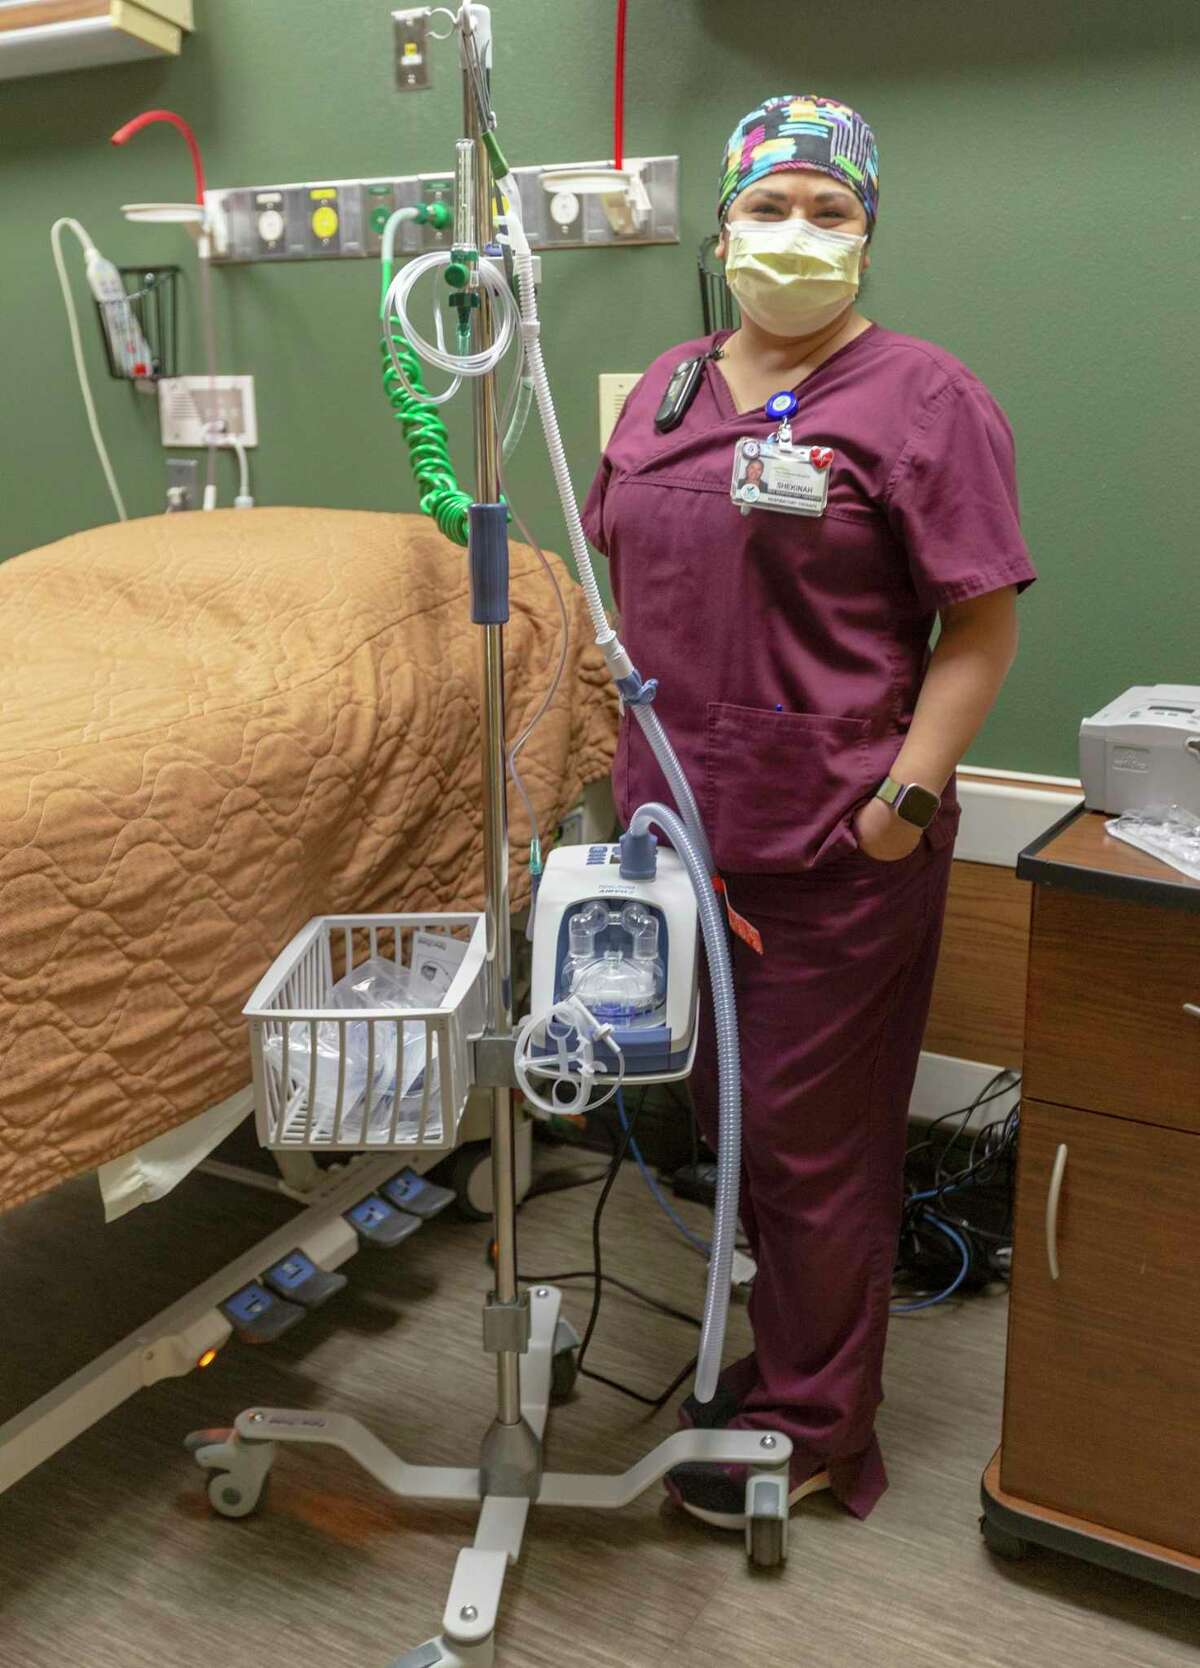 Respiratory therapist Shekinah Barrientez poses May 18 with an Airvo 2 high flow system at Christus Santa Rosa Hospital - New Braunfels. When Barrientez’s mother was at the New Braunfels hospital with COVID-19 Barrientez used an Airvo to provide her mother Nasal High Flow Therapy treatment which kept her mother off a ventilator.